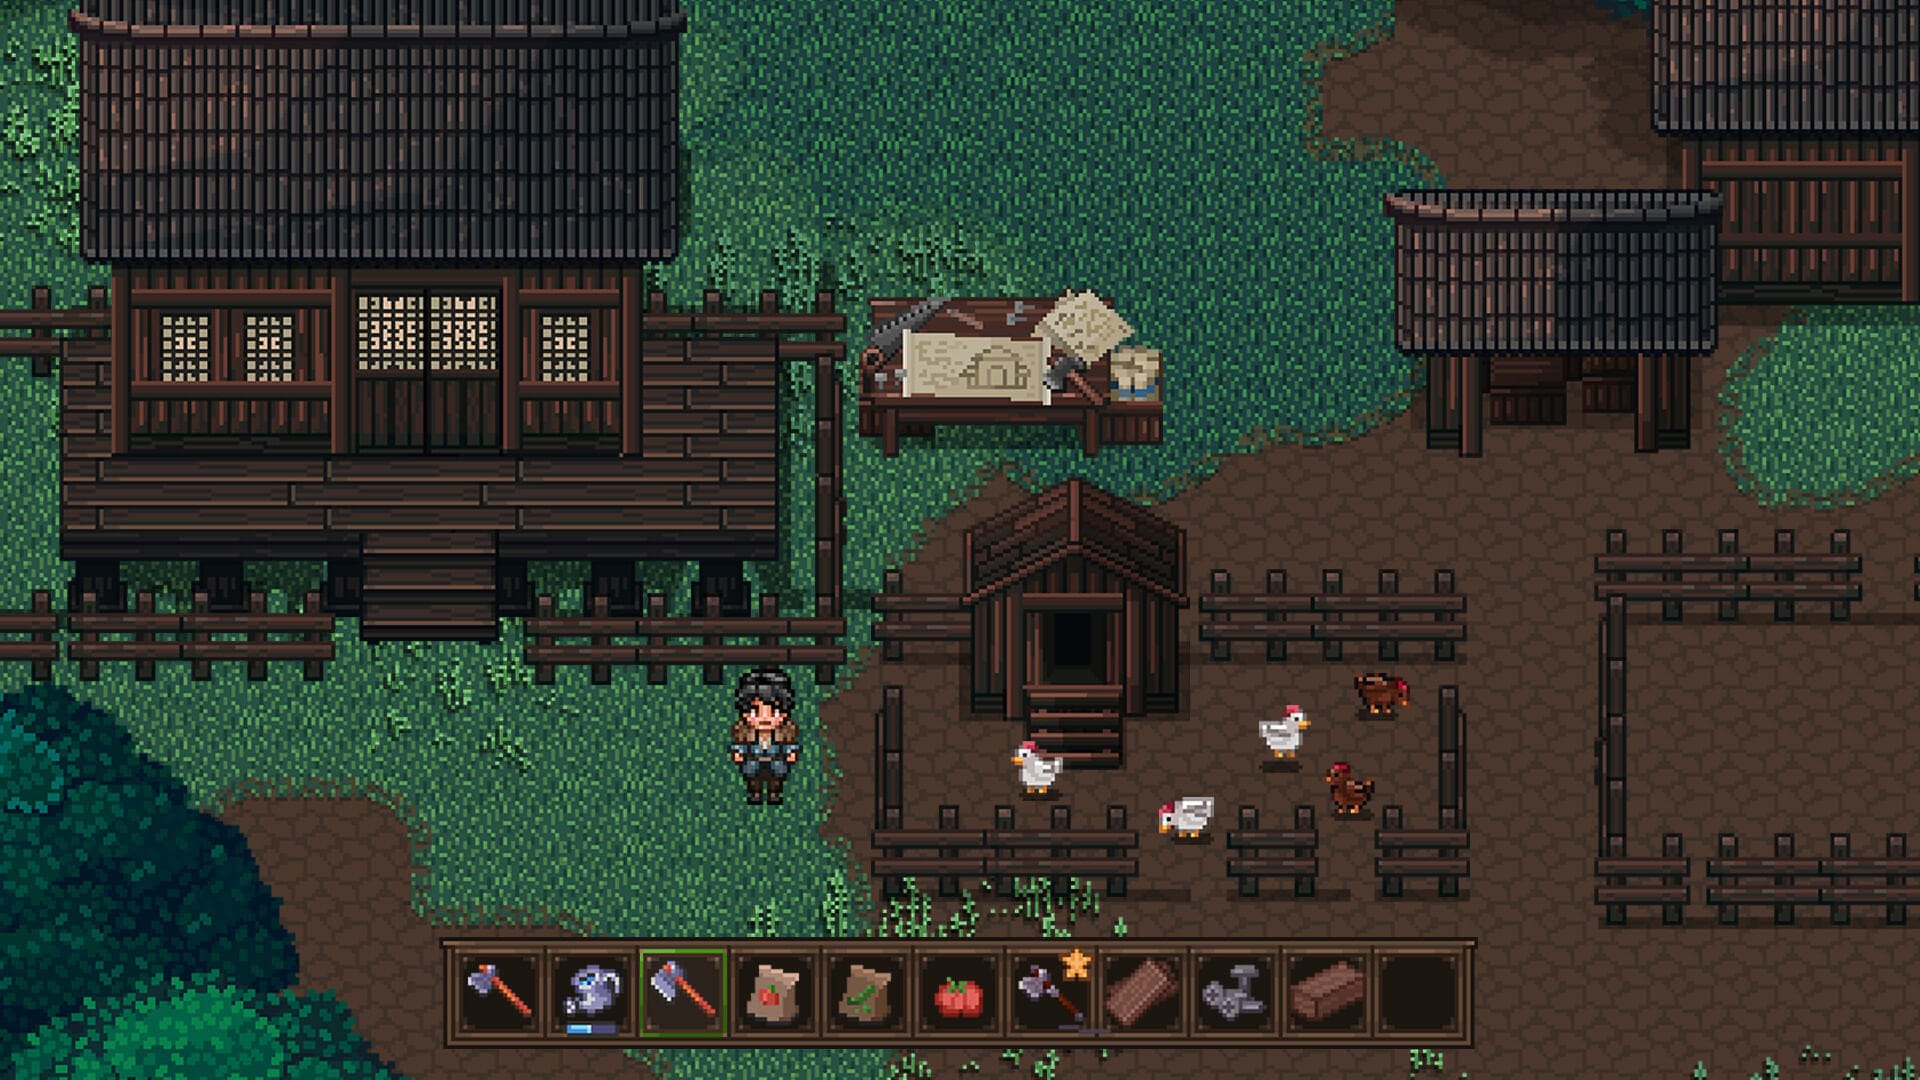 The player standing on their farm in Daomei Village